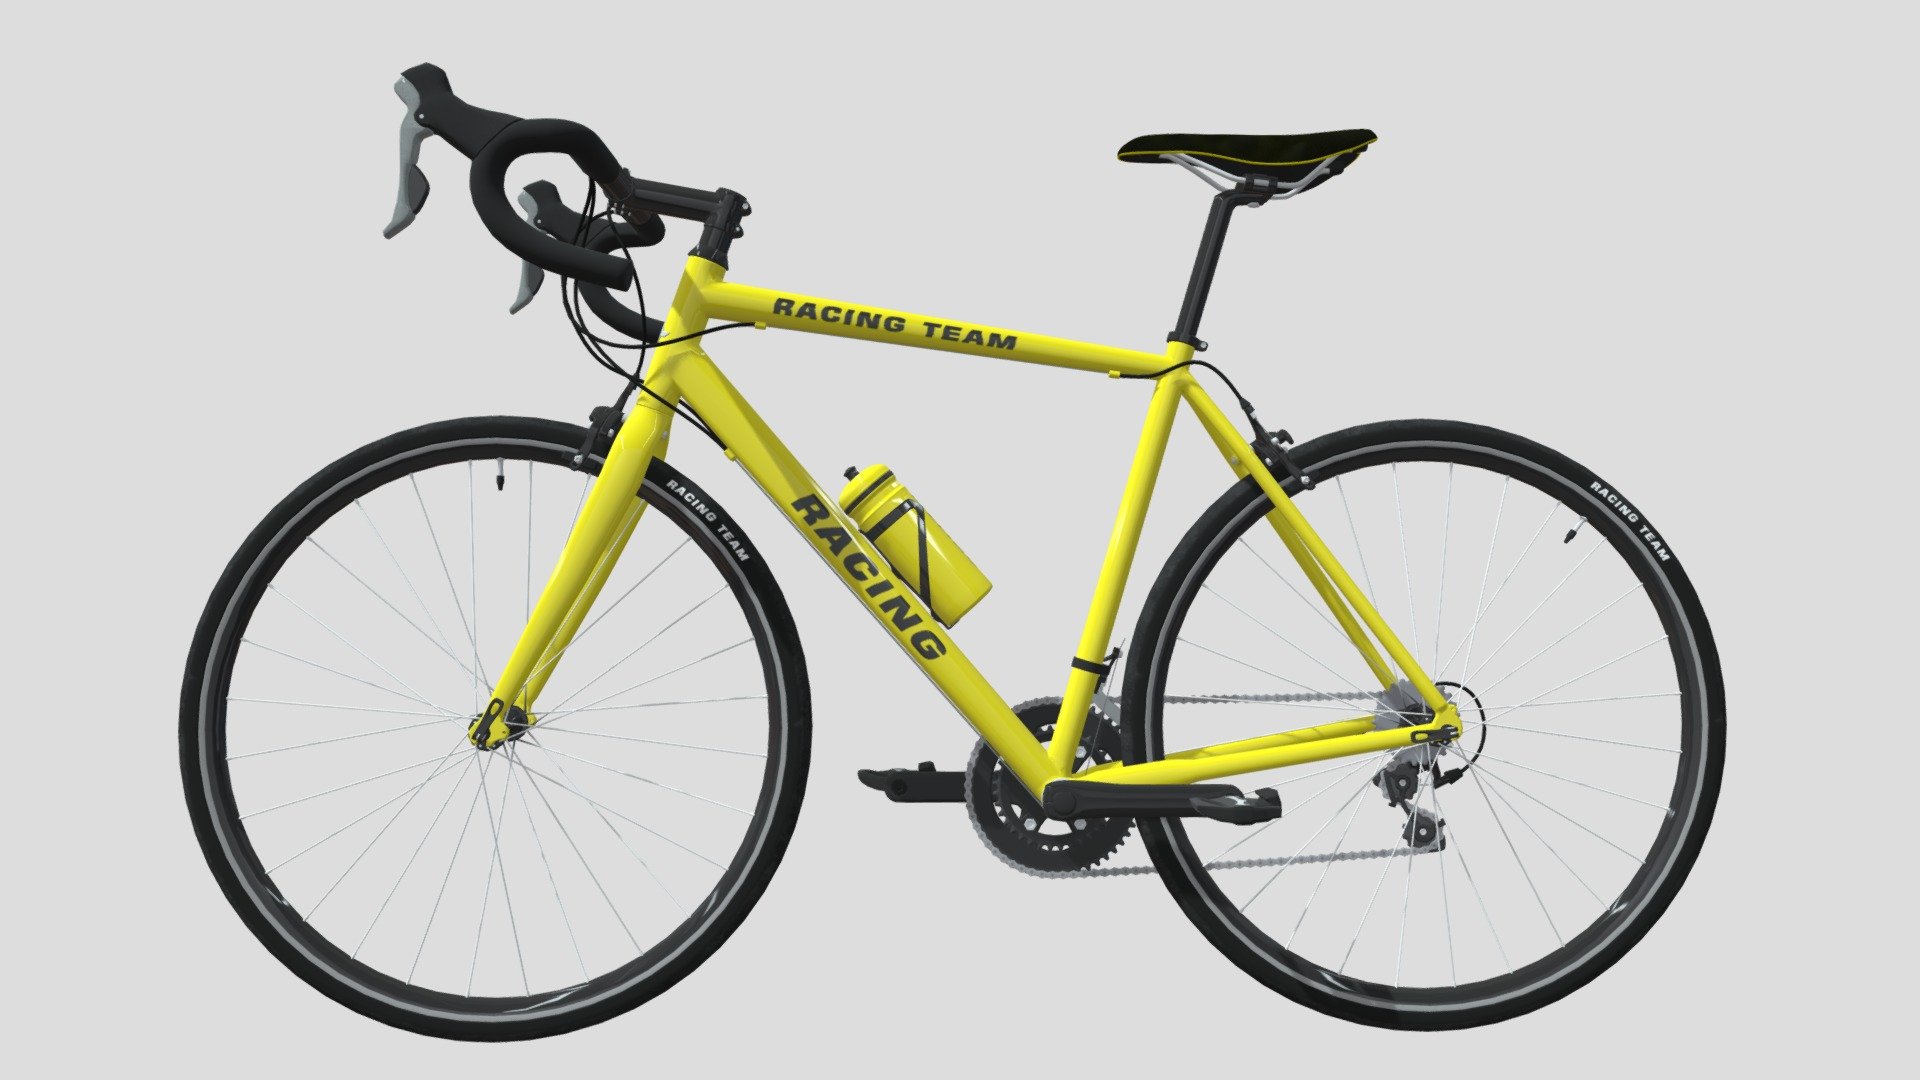 Racing Bicycle 3D model is a high quality, photo real model that will enhance detail and realism to any of your game projects or commercials. The model has a fully textured, detailed design that allows for close-up renders 3d model